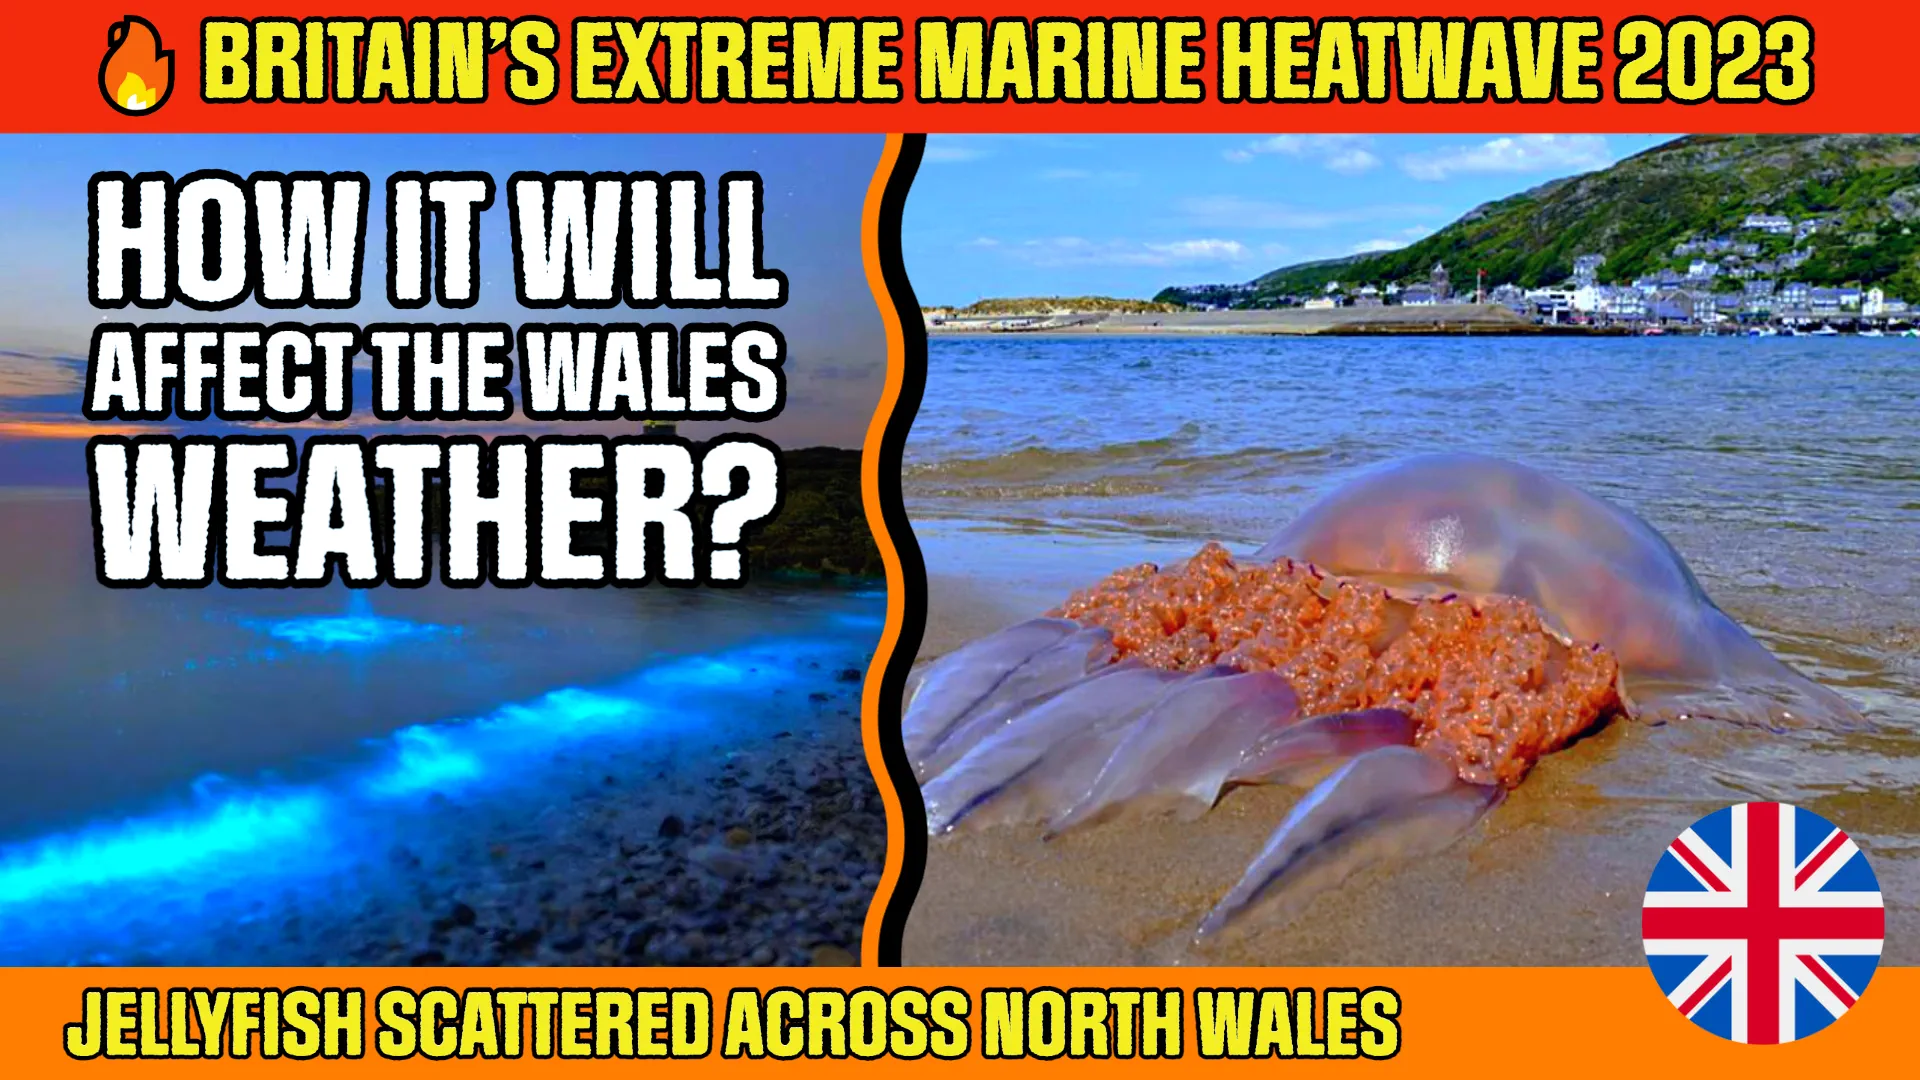 jellyfish scattered across North Wales